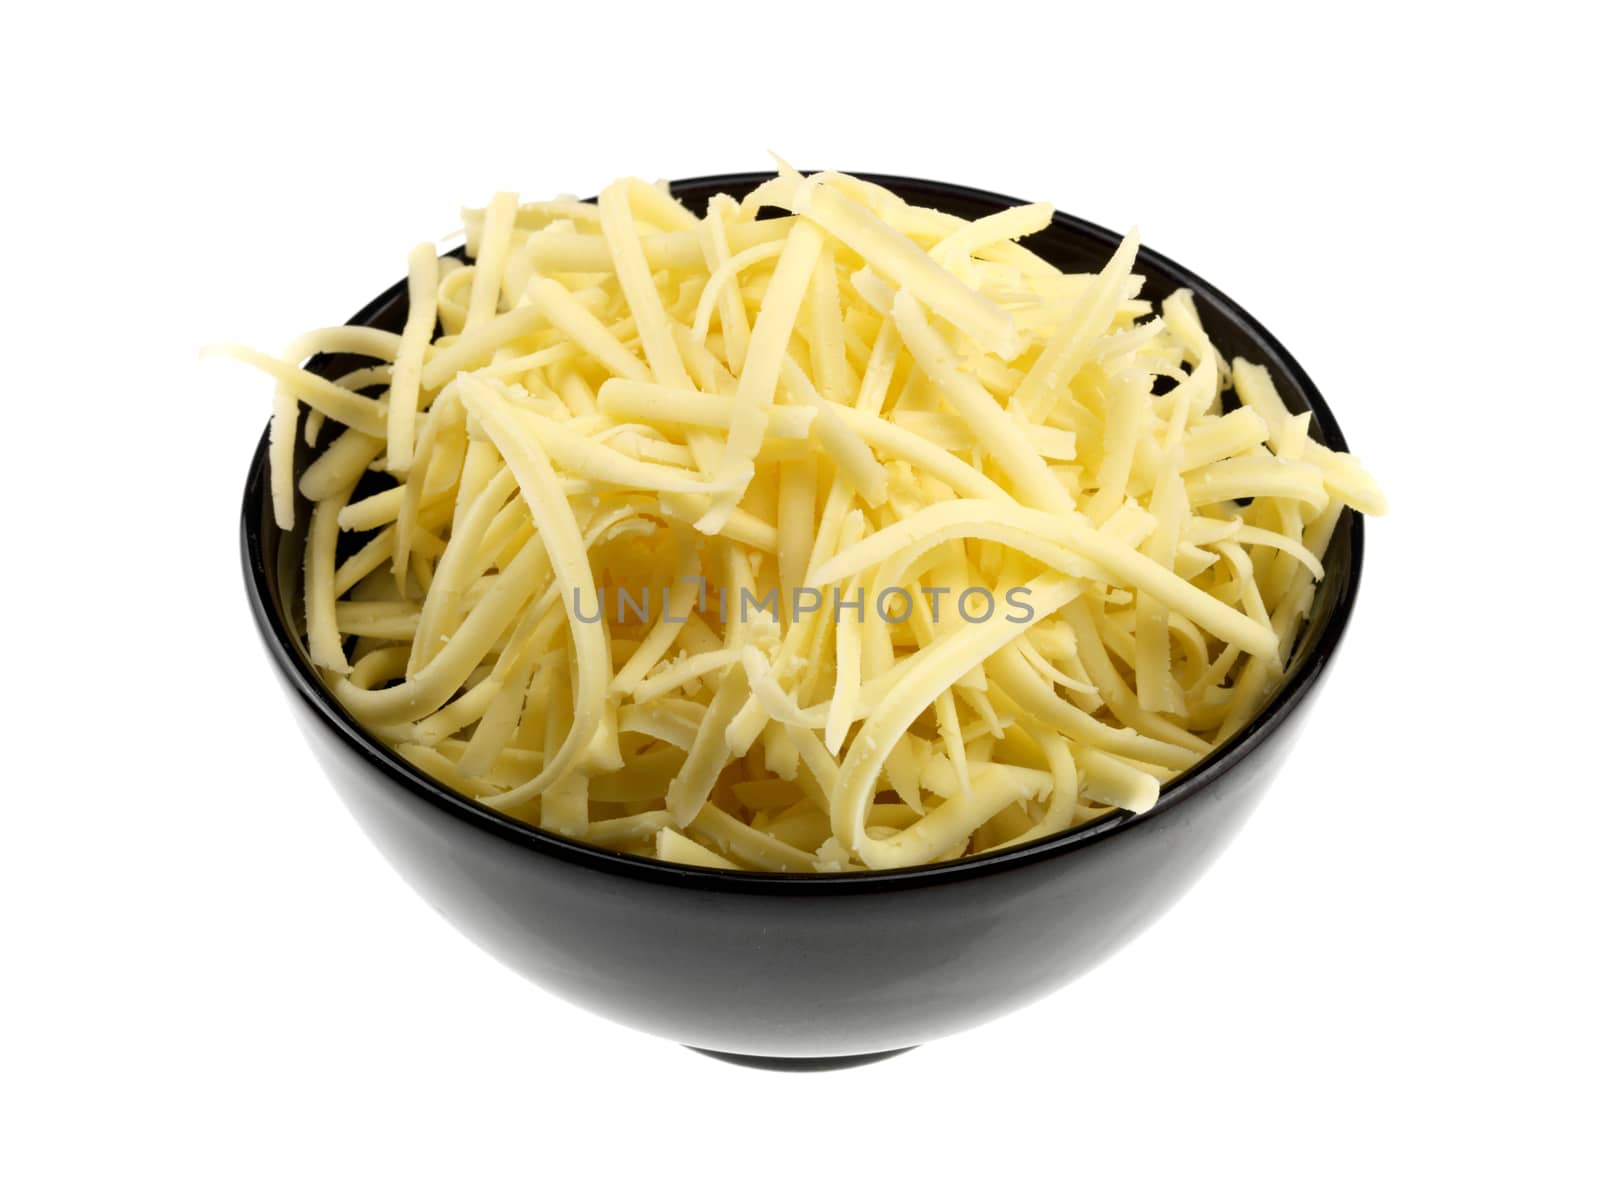 Bowl of Grated Cheese by Whiteboxmedia